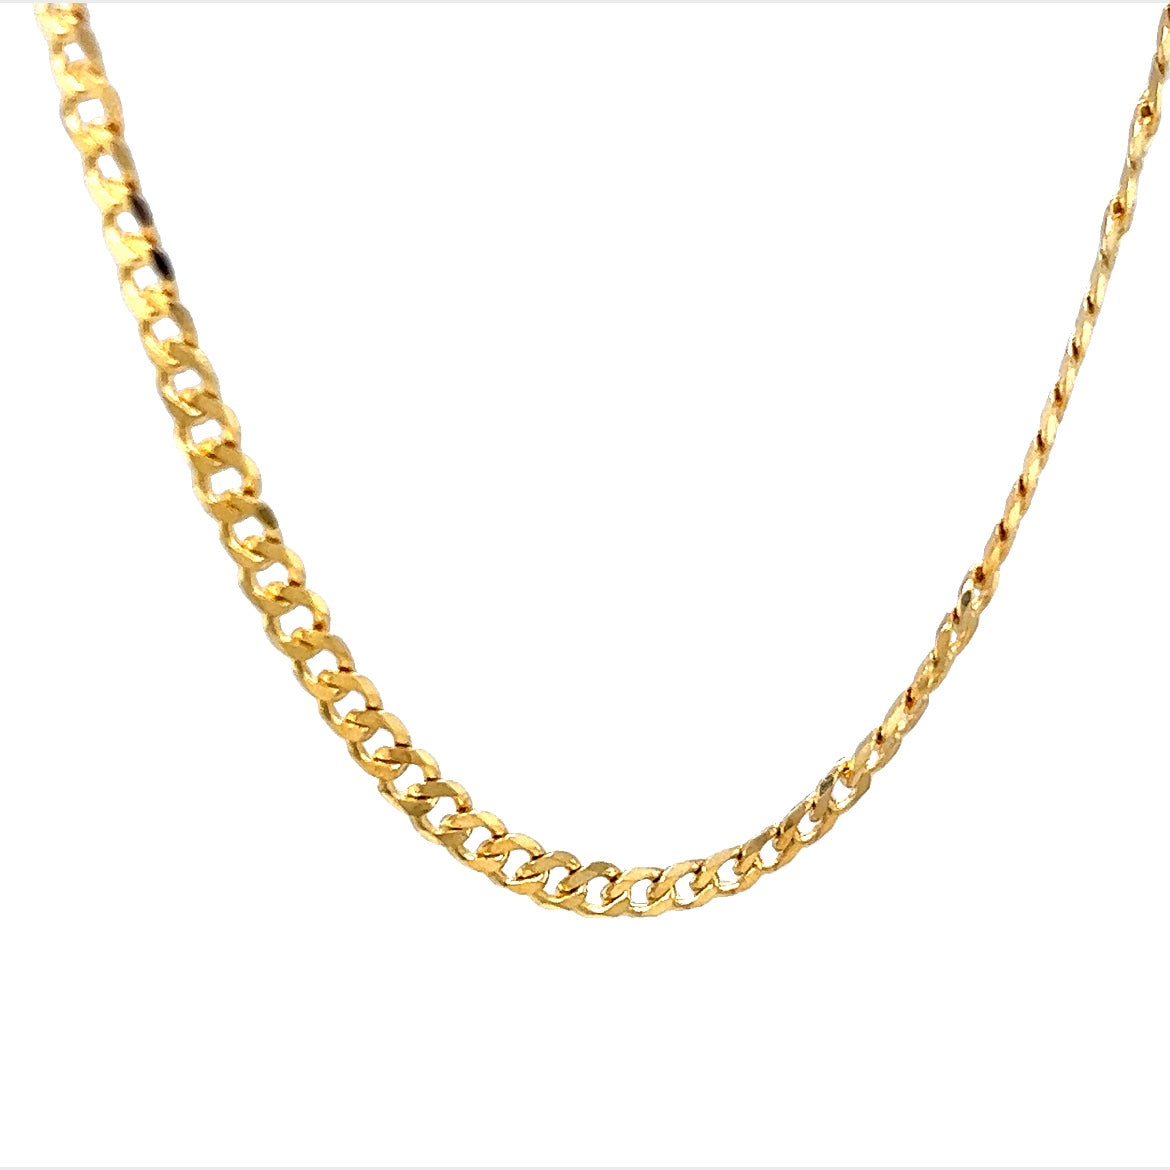 20 Inch Flat Curb Link Chain Necklace in 14k Yellow Gold